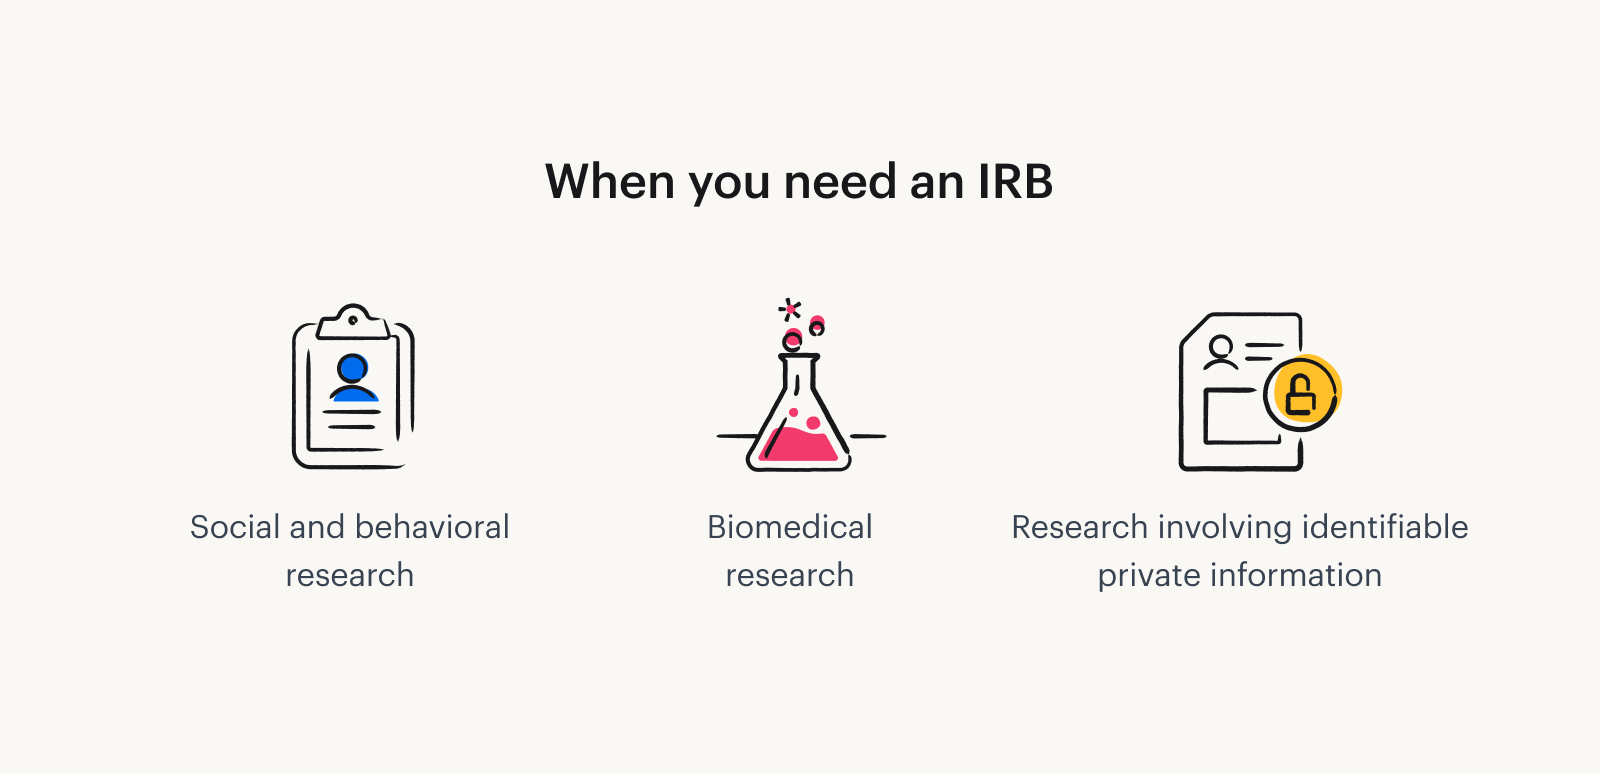 When you need an IRB: for social and behavioral research, biomedical research, and research involving identifiable private information.